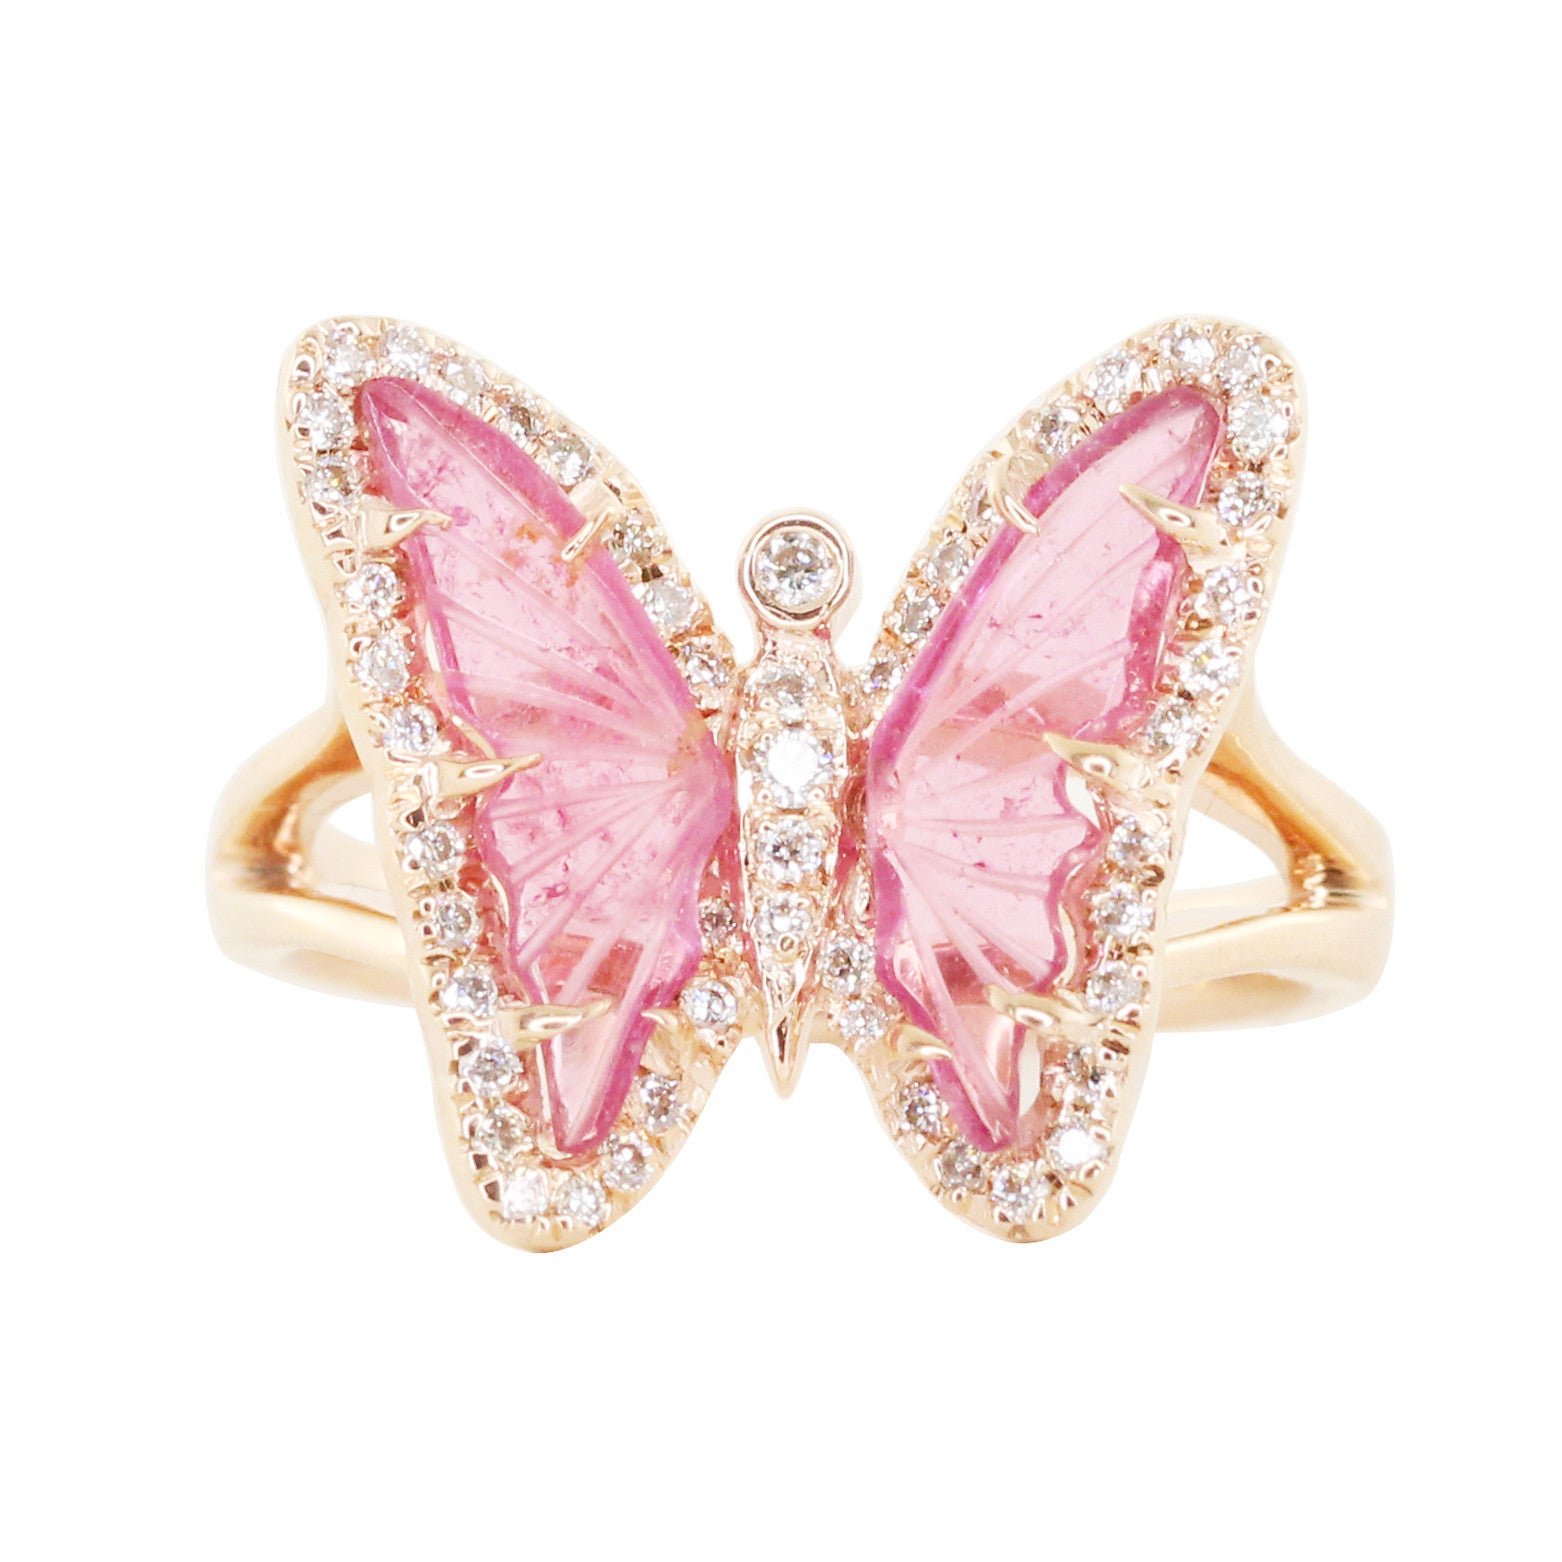 14kt Gold and Diamond Pink Tourmaline Butterfly Ring White Gold / 7